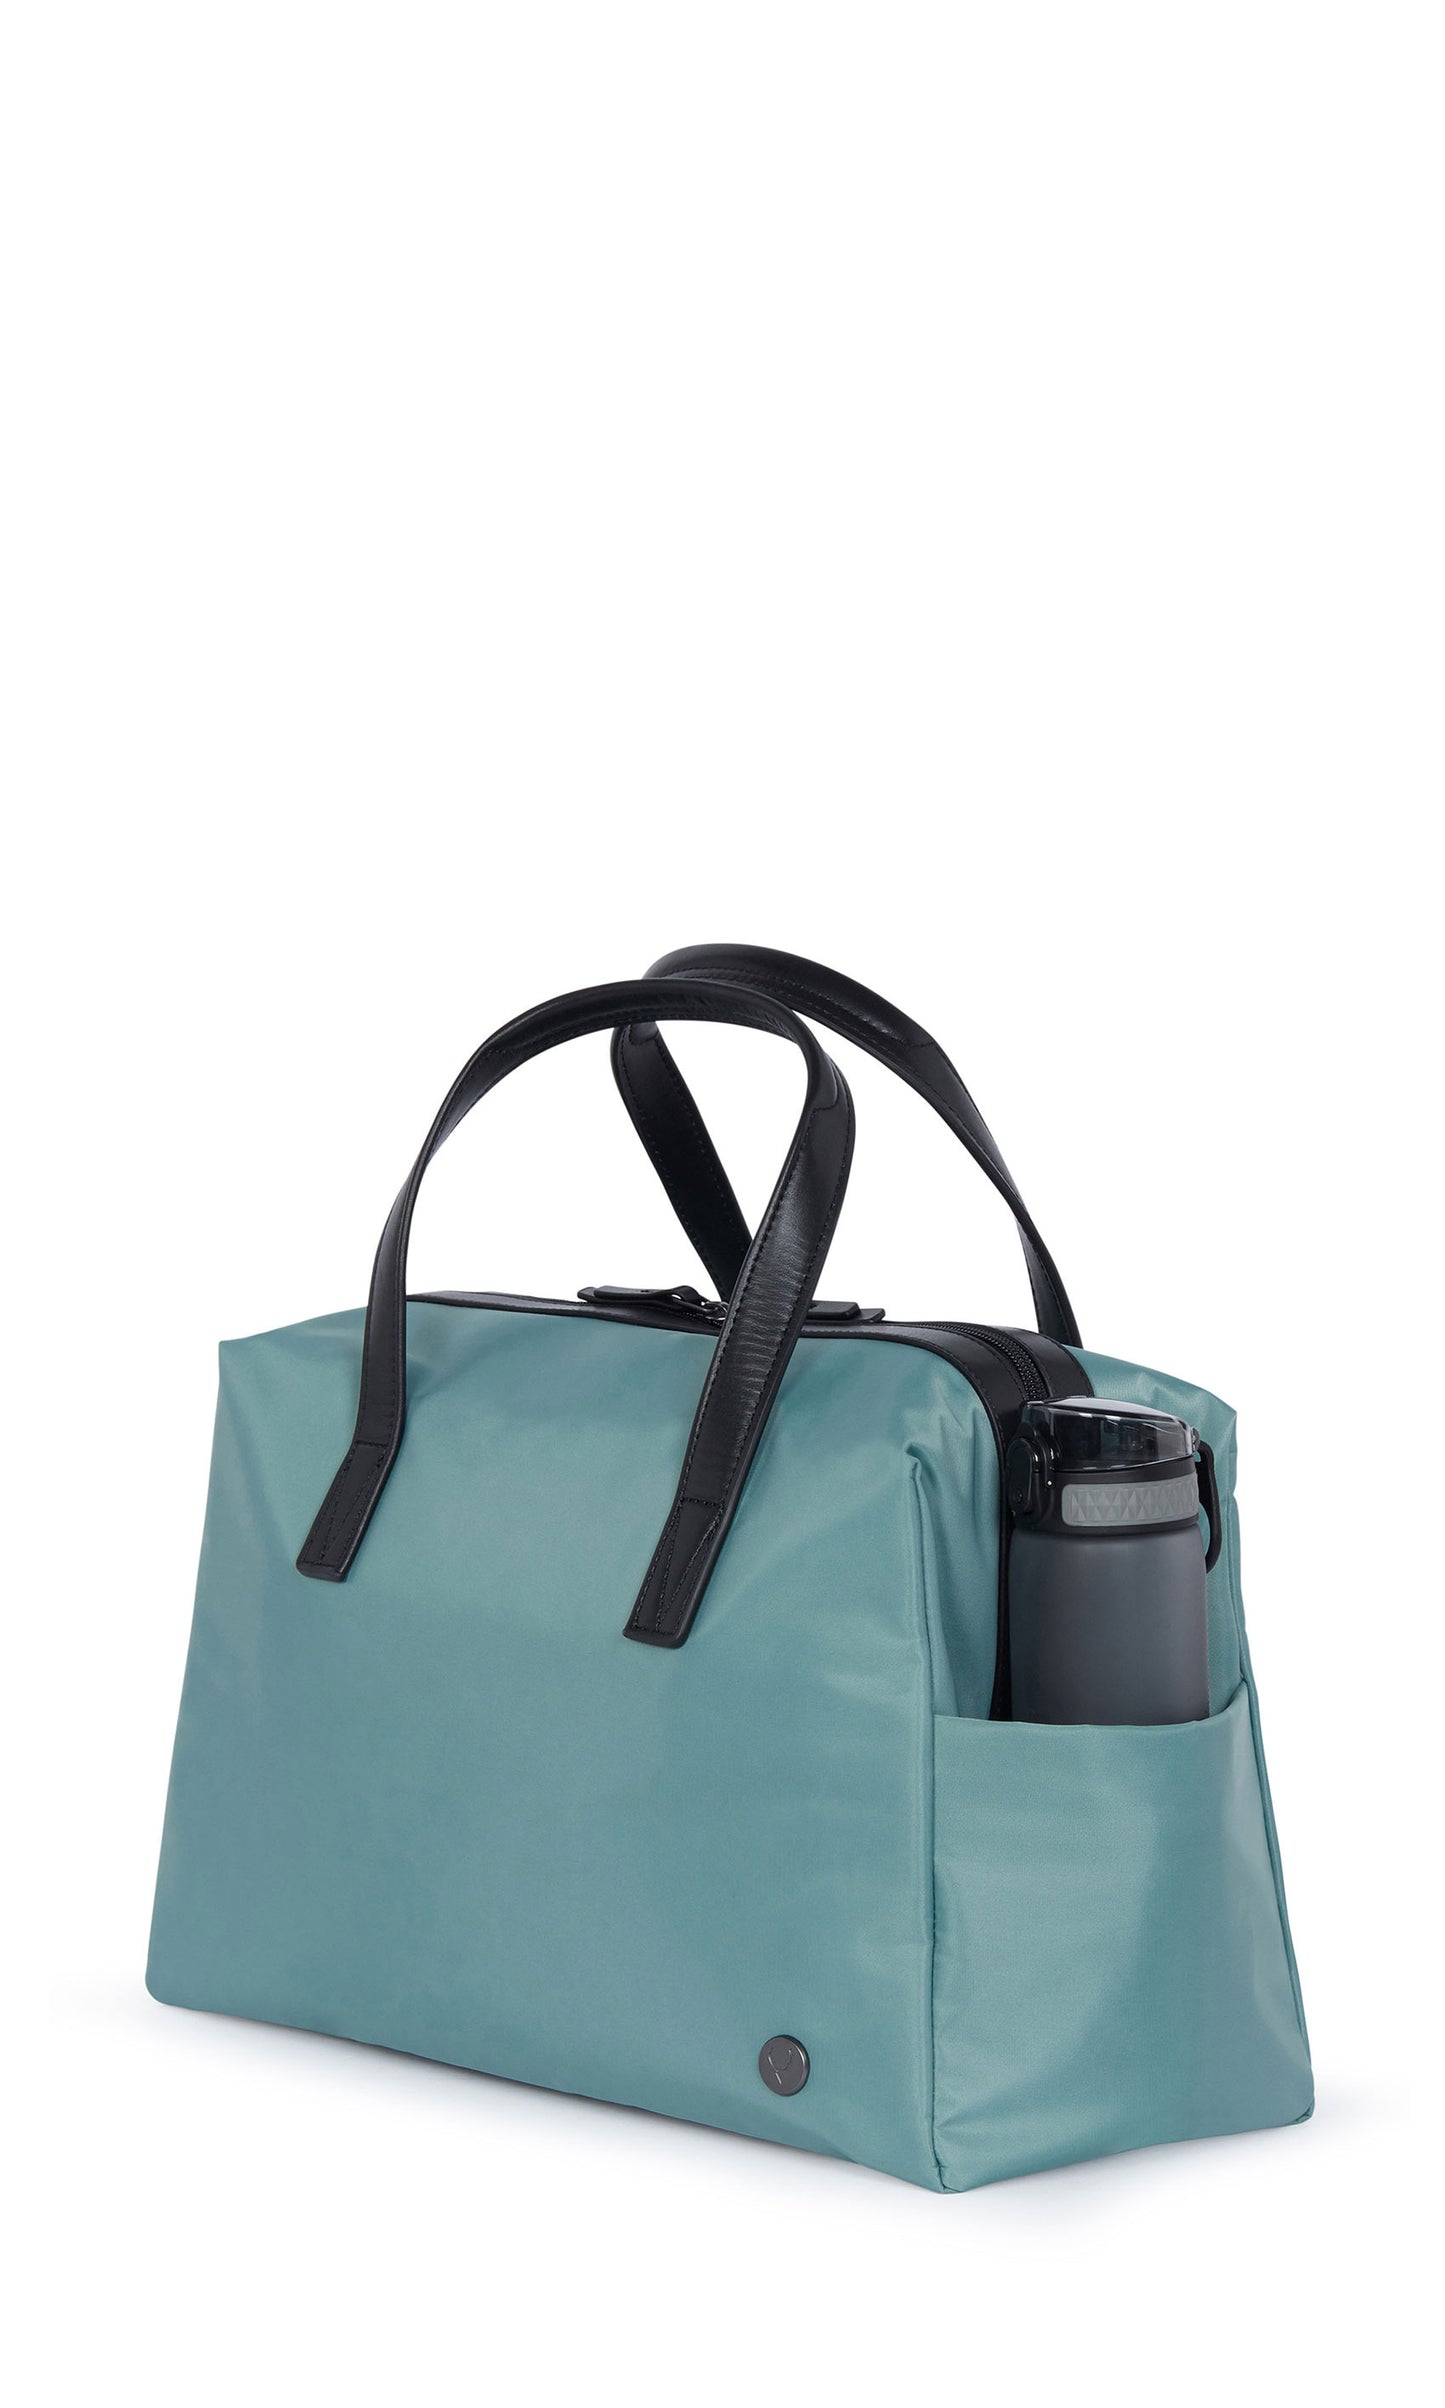 Chelsea overnight bag in mineral